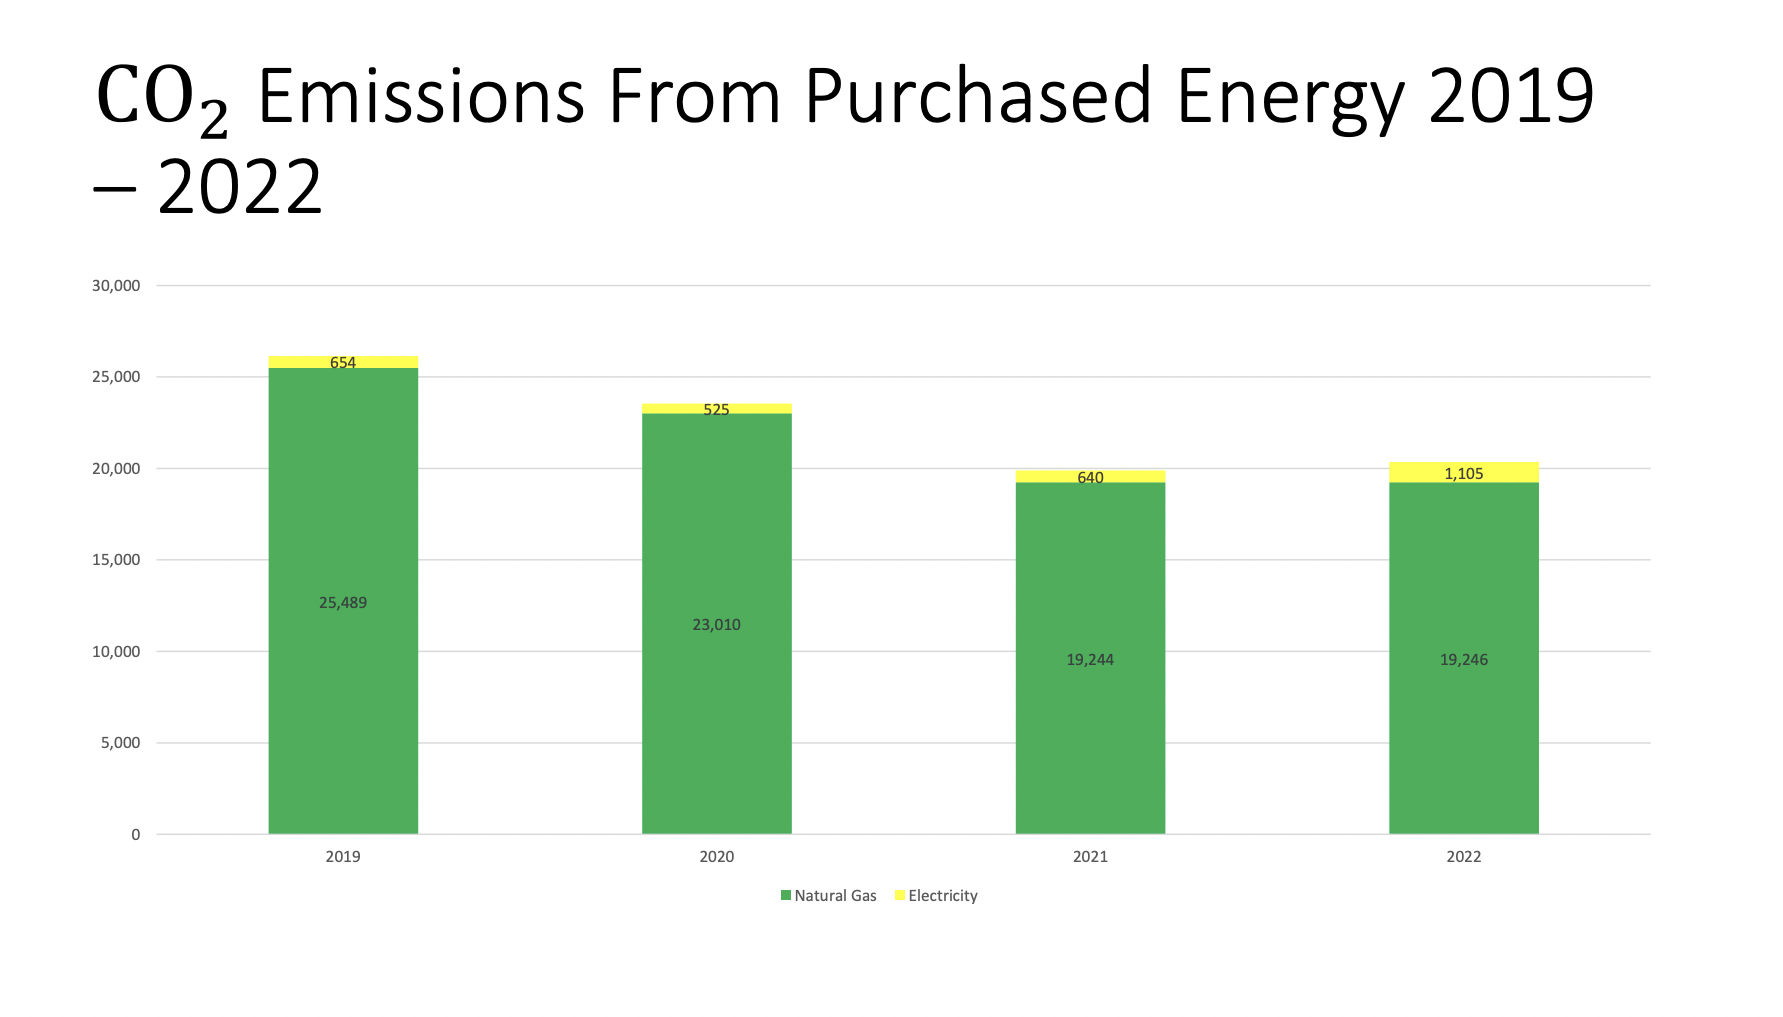 Campus CO2 emissions of purchased energy from 2019 to 2022.  In 2019 electricity CO2 emissions equal 933 tonnes, natural gas CO2 emissions equal 25,319 tonnes. In 2020 electricity CO2 emissions equal 719 tonnes, natural gas CO2 emissions equal 23,656 tonnes. In 2021, electricity CO2 emissions equal 793 tonnes, natural gas CO2 emissions equal 19,243 tonnes. In 2022, electricity CO2 emissions equal 1,105 tonnes, natural gas CO2 emissions equal 19,246 tonnes.